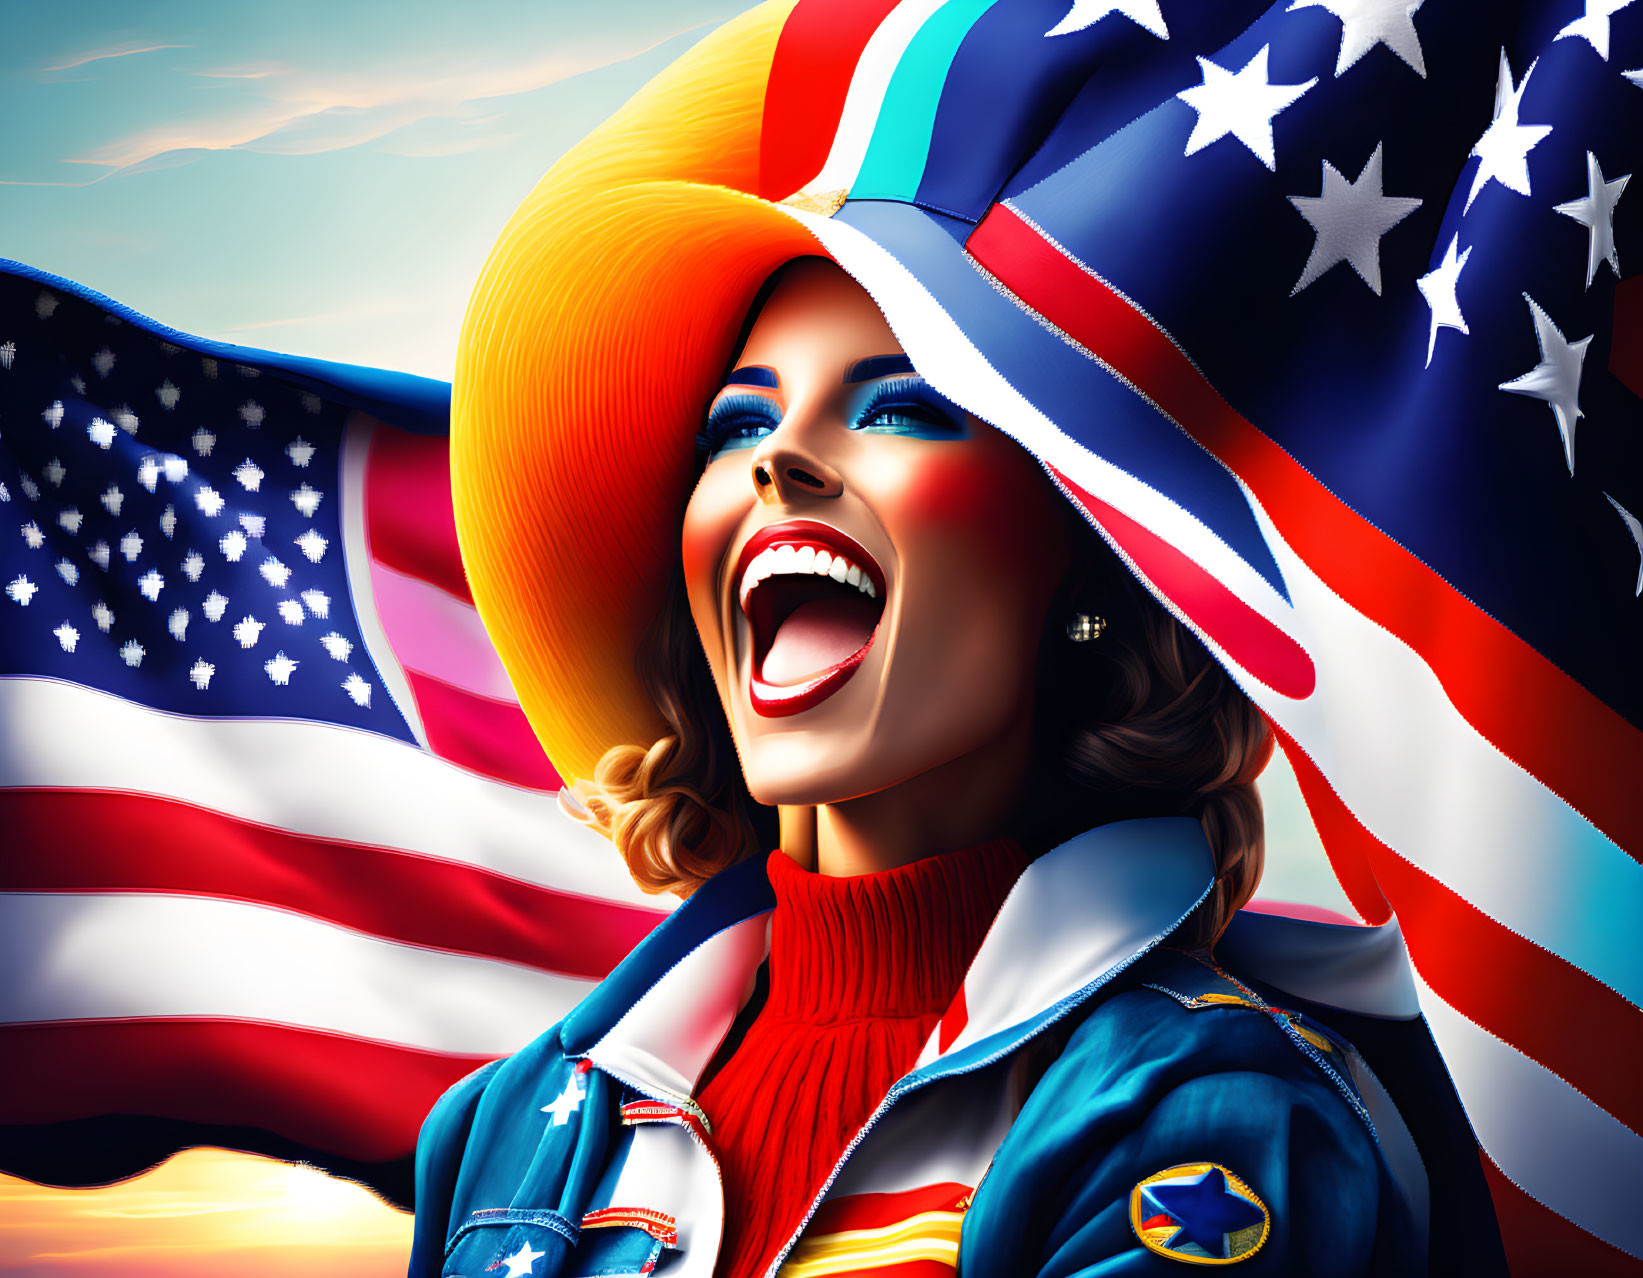 Smiling woman in patriotic hat with American flag background